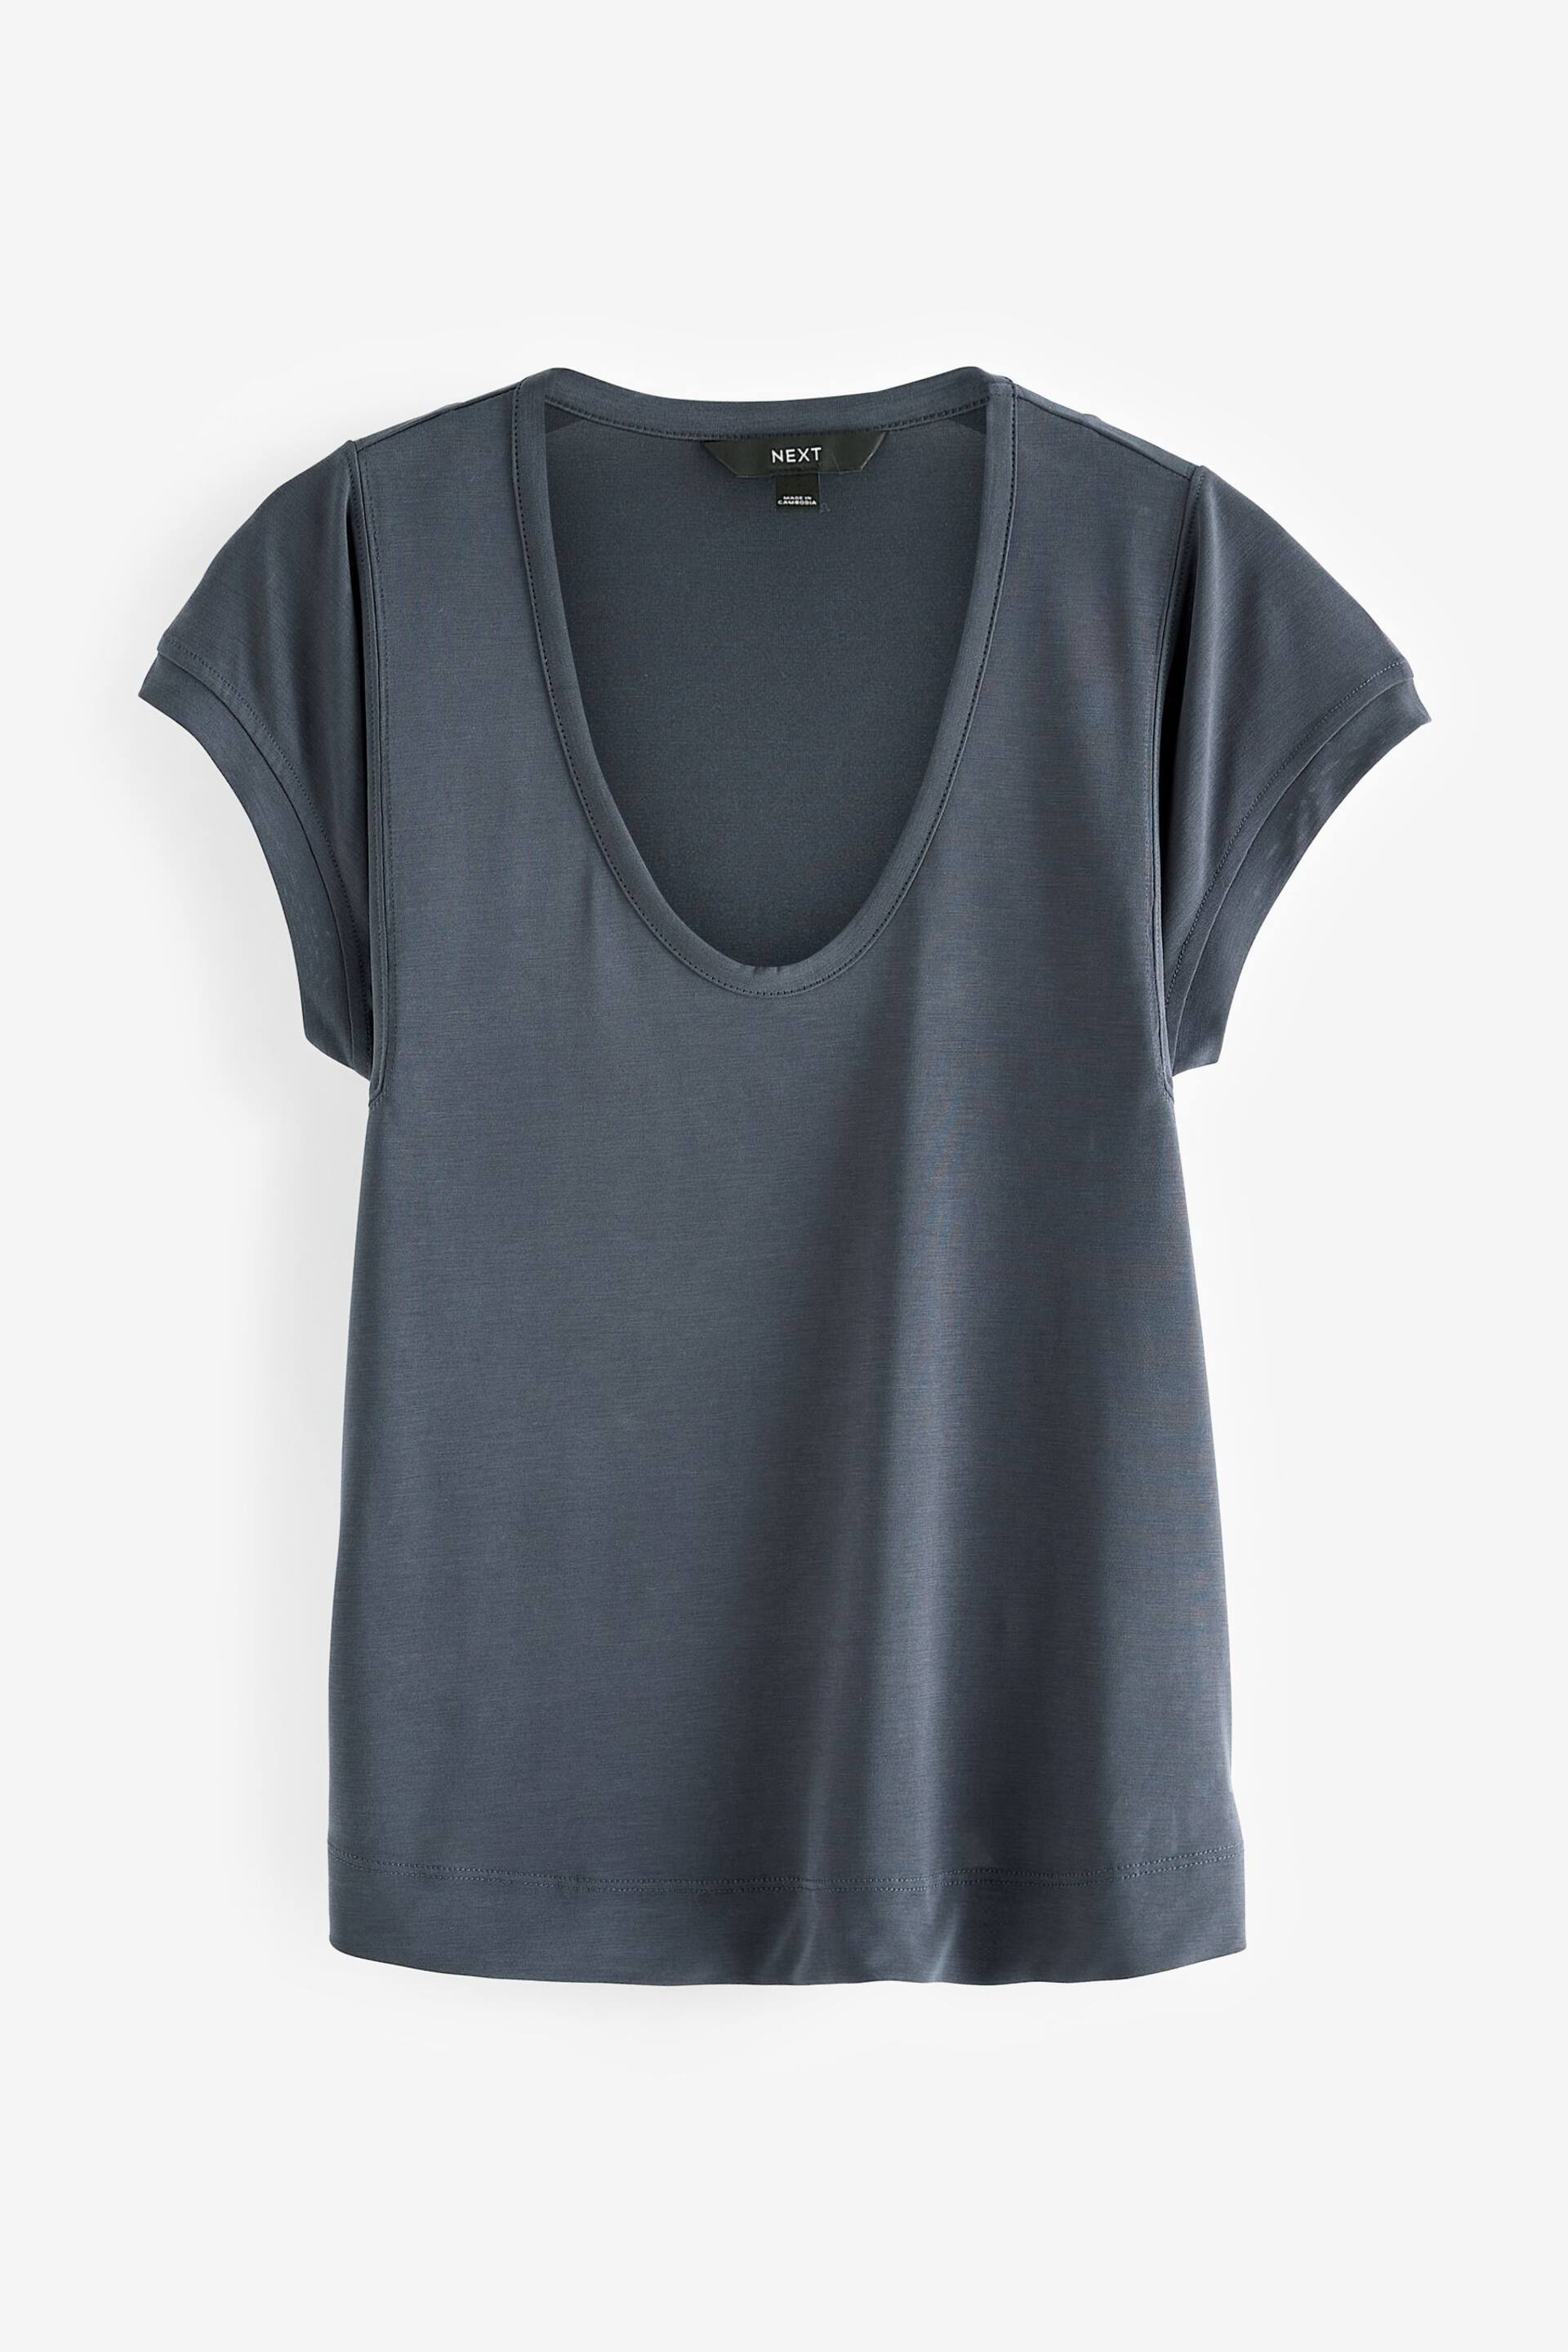 Charcoal Grey Premium Modal Rich Short Sleeve Scoop Neck T-Shirt - Image 2 of 2